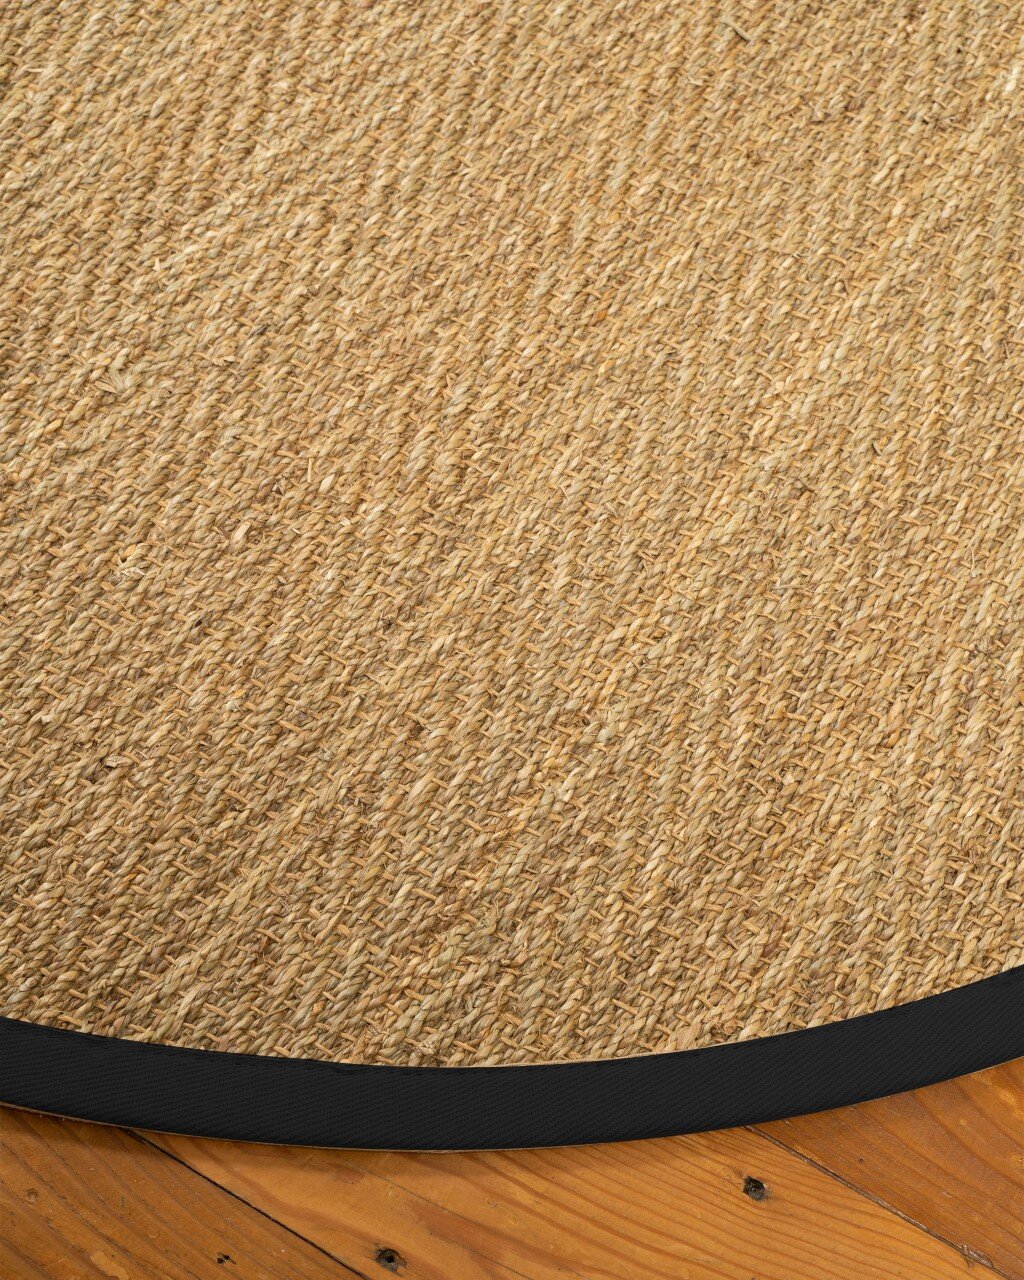 Natural Area Rugs Seagrass.jpg